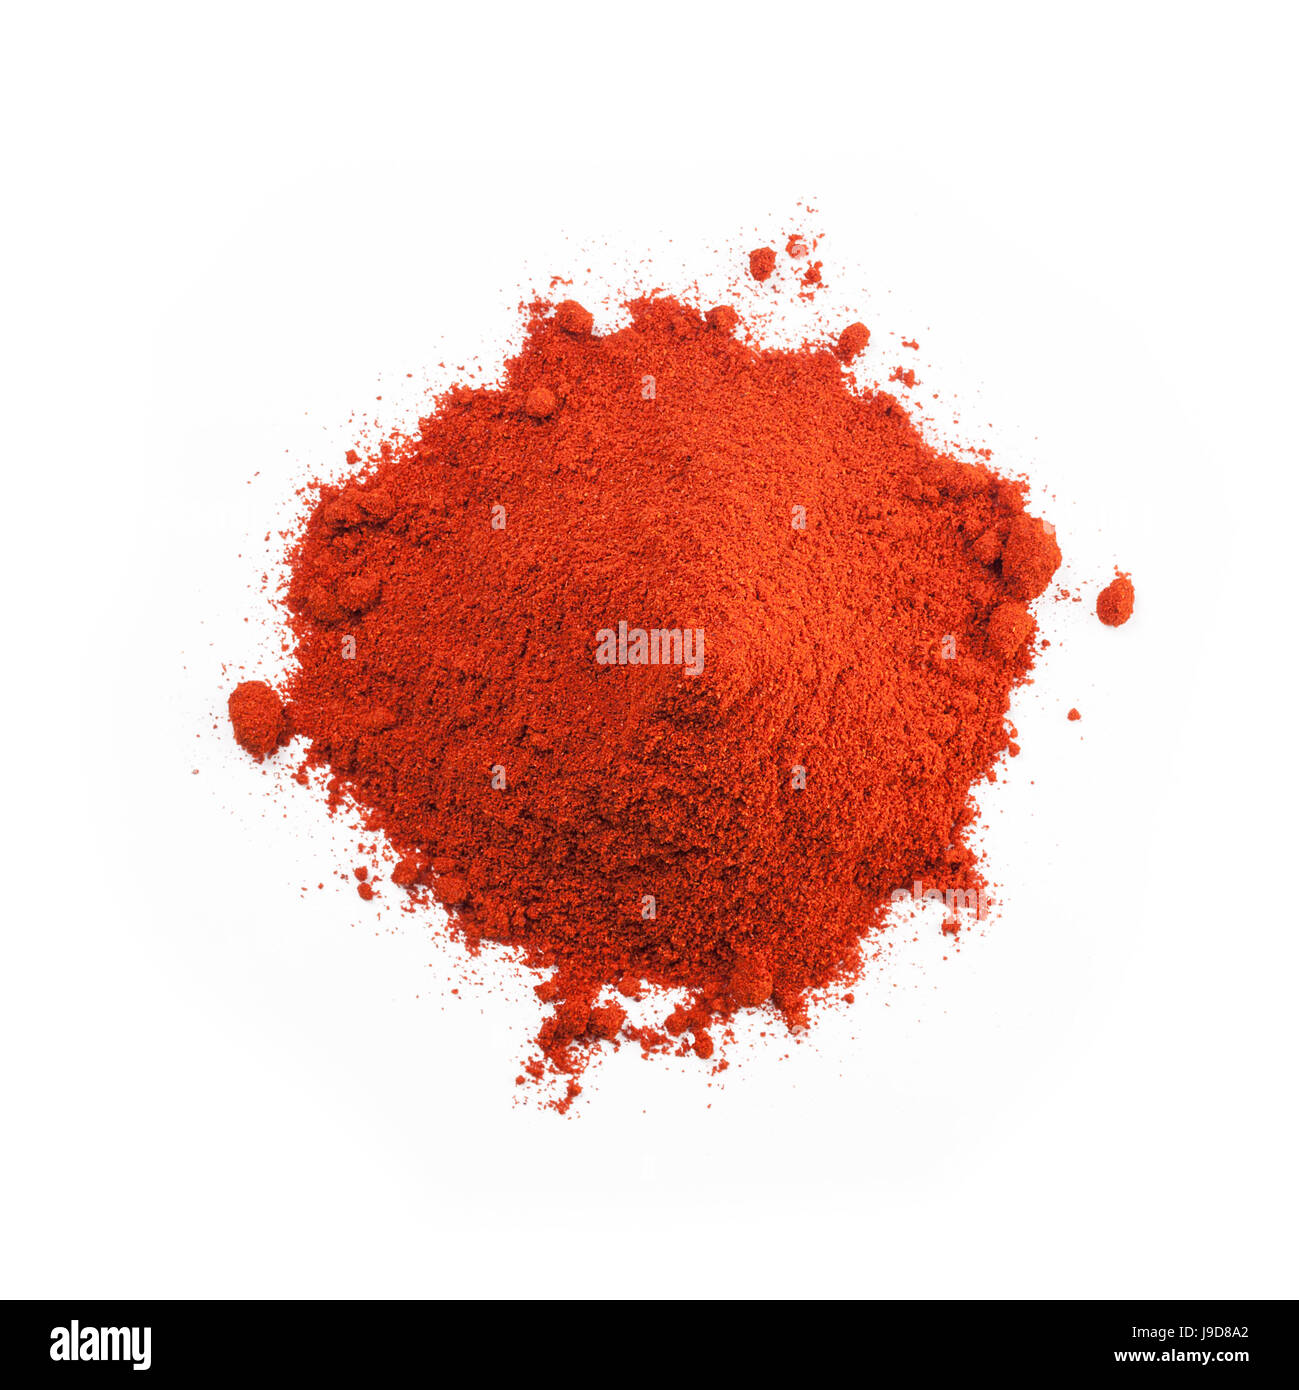 Powdered dried red pepper, isolated Stock Photo